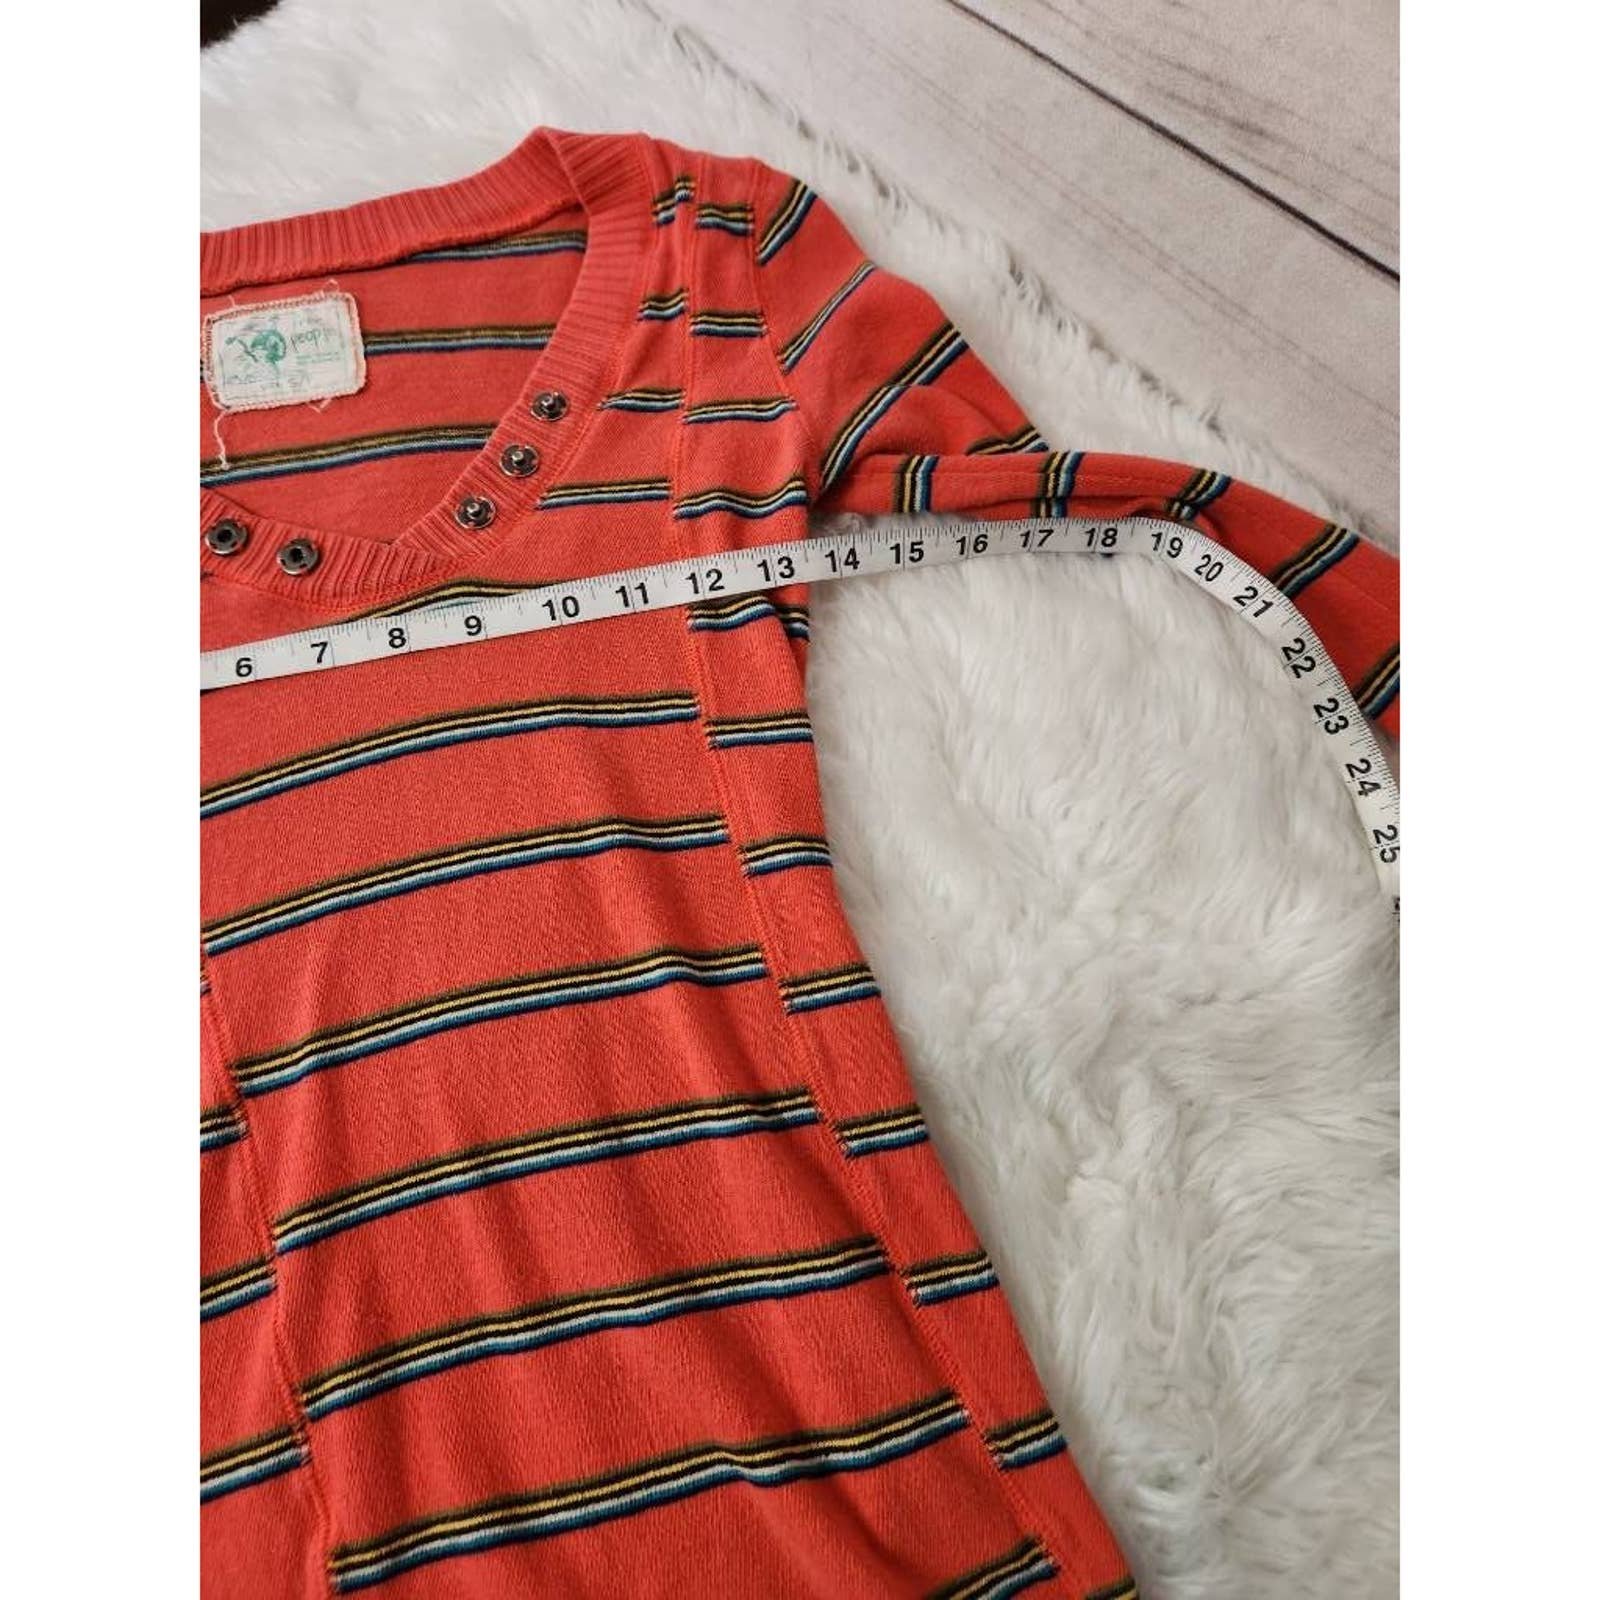 high discount Free People Womens Pullover Sweater Orange Striped Long Sleeve V Neck S Fk3eRrNjq Cool